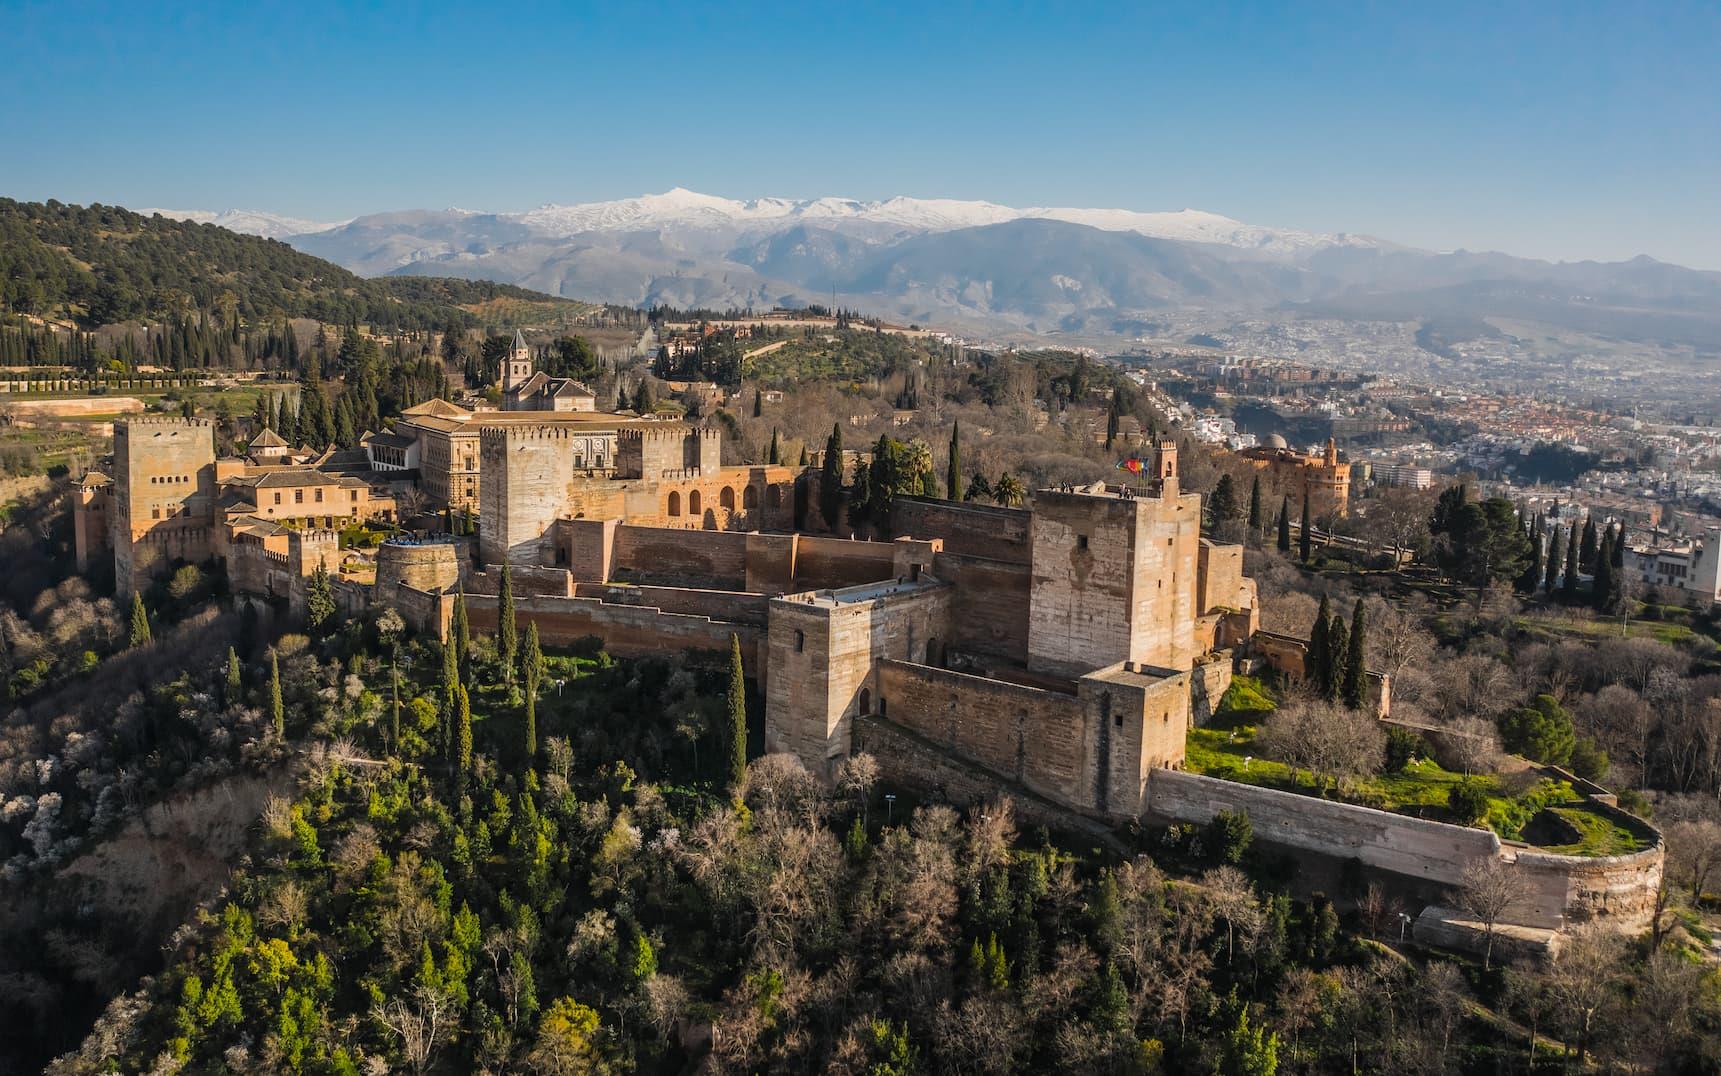 Complete Alhambra with Nasrid Palaces